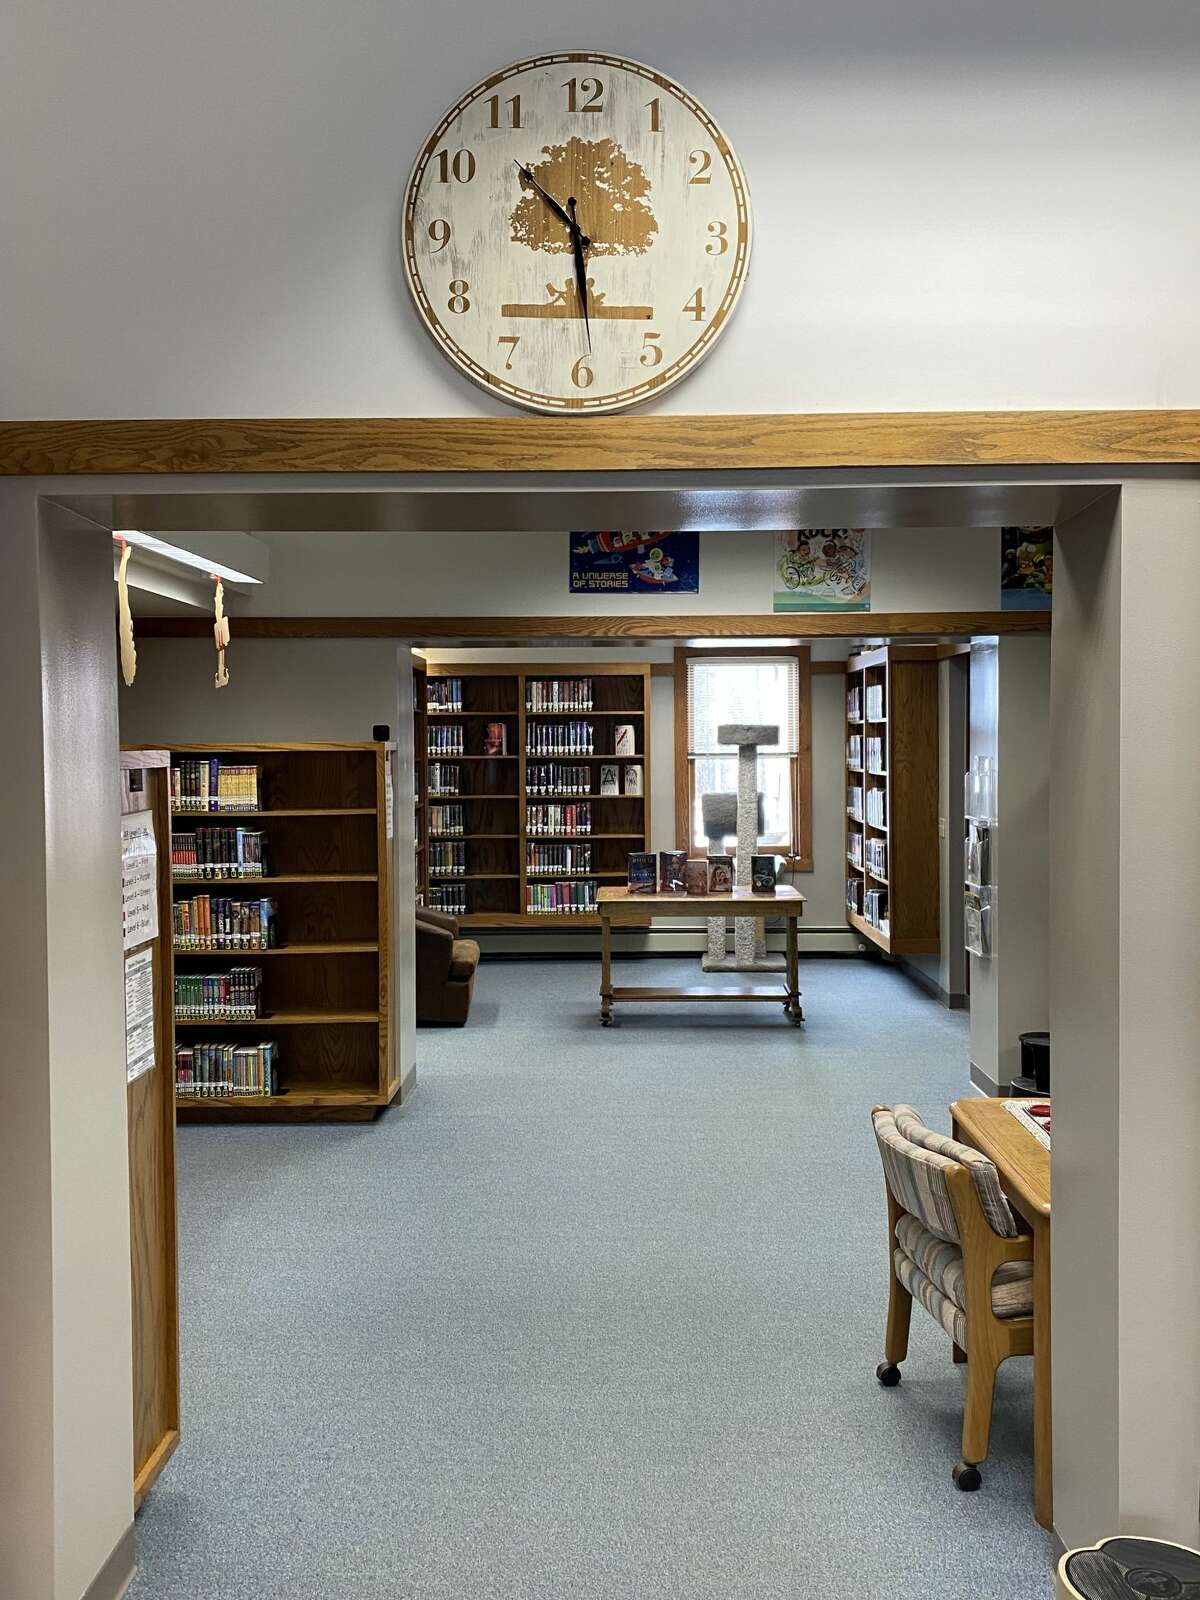 Sleeper Public Library received generous donations in December for renovations.